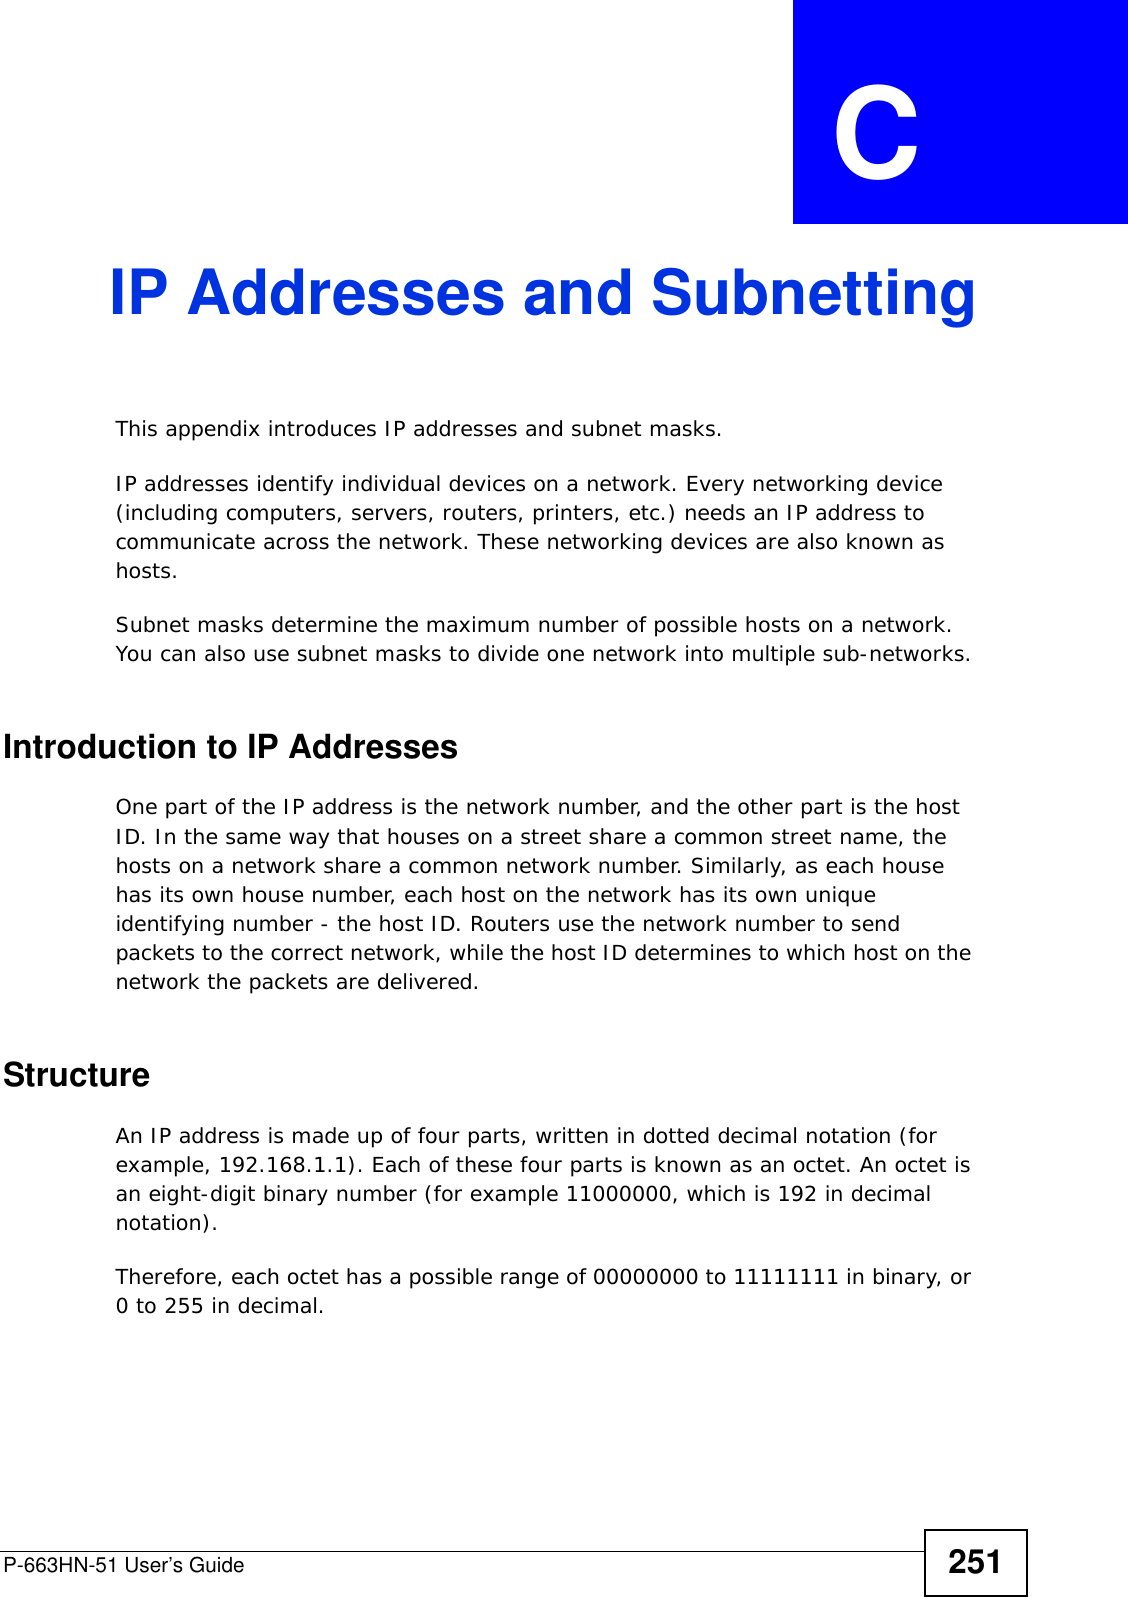 P-663HN-51 User’s Guide 251APPENDIX  C IP Addresses and SubnettingThis appendix introduces IP addresses and subnet masks. IP addresses identify individual devices on a network. Every networking device (including computers, servers, routers, printers, etc.) needs an IP address to communicate across the network. These networking devices are also known as hosts.Subnet masks determine the maximum number of possible hosts on a network. You can also use subnet masks to divide one network into multiple sub-networks.Introduction to IP AddressesOne part of the IP address is the network number, and the other part is the host ID. In the same way that houses on a street share a common street name, the hosts on a network share a common network number. Similarly, as each house has its own house number, each host on the network has its own unique identifying number - the host ID. Routers use the network number to send packets to the correct network, while the host ID determines to which host on the network the packets are delivered.StructureAn IP address is made up of four parts, written in dotted decimal notation (for example, 192.168.1.1). Each of these four parts is known as an octet. An octet is an eight-digit binary number (for example 11000000, which is 192 in decimal notation). Therefore, each octet has a possible range of 00000000 to 11111111 in binary, or 0 to 255 in decimal.